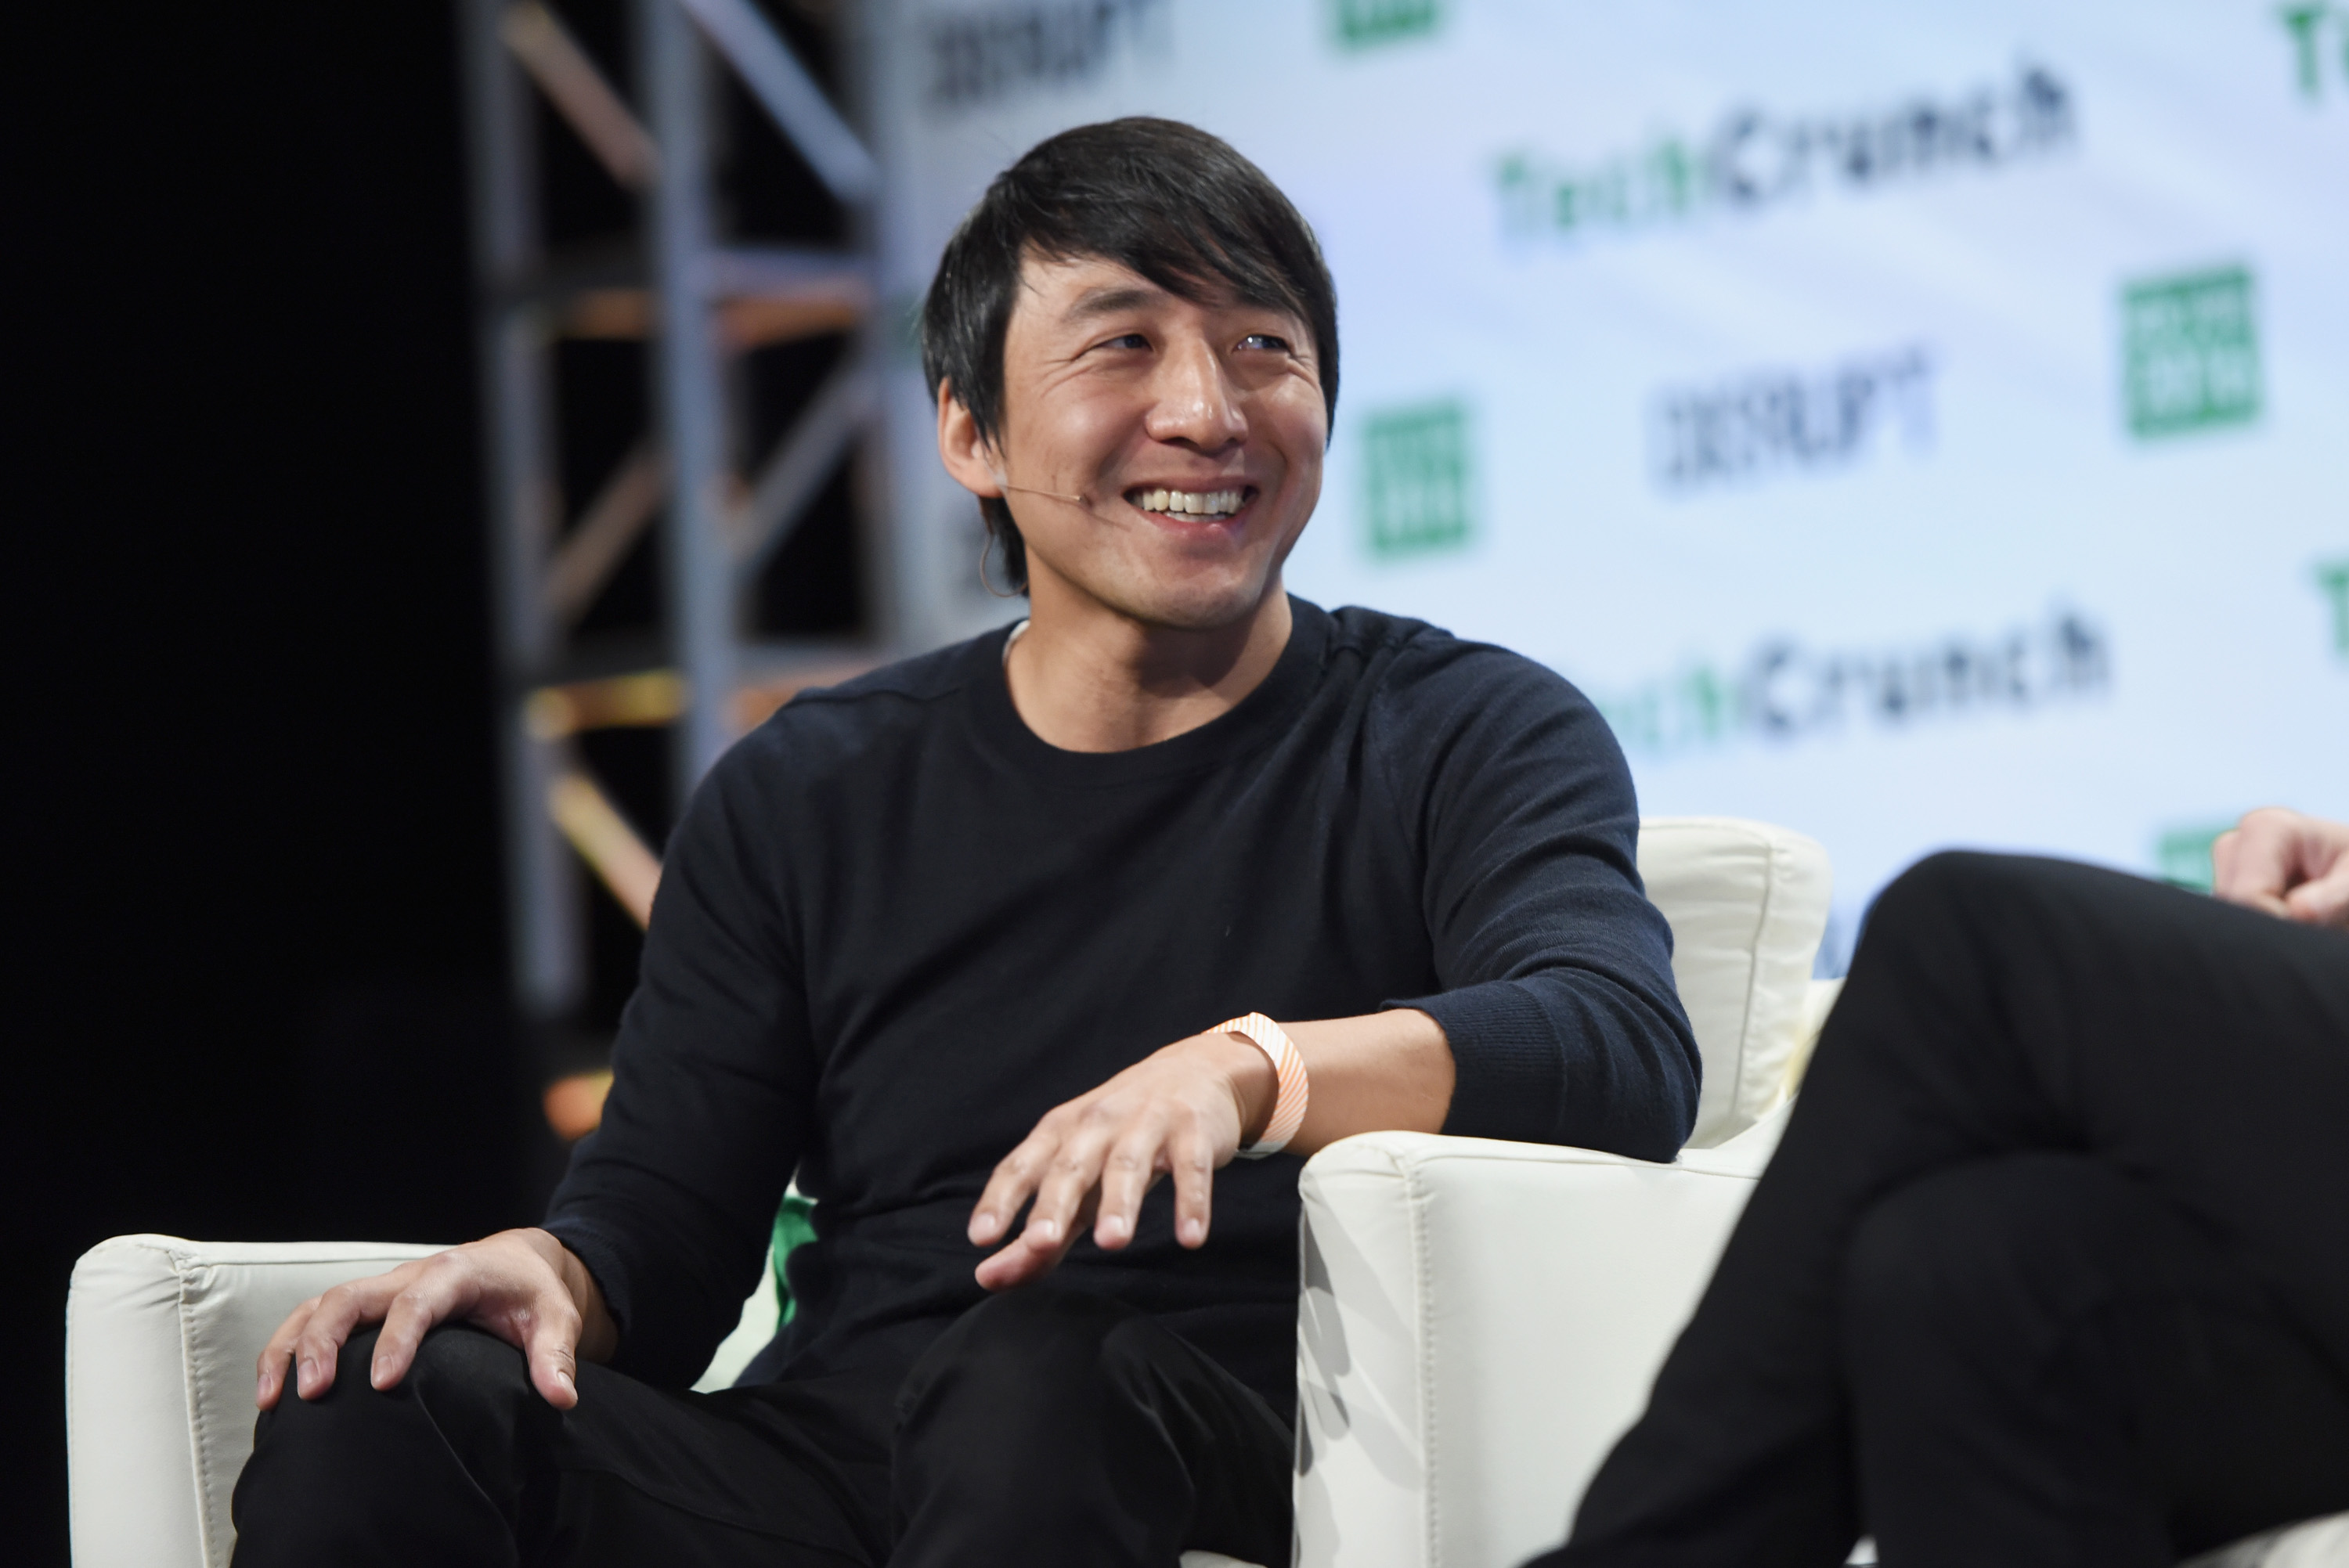 Co-Founder and CEO of Giphy Alex Chung speaks onstage during TechCrunch Disrupt NY 2016 at Brooklyn Cruise Terminal on May 9, 2016 in New York City. (Noam Galai—Getty Images for TechCrunch)